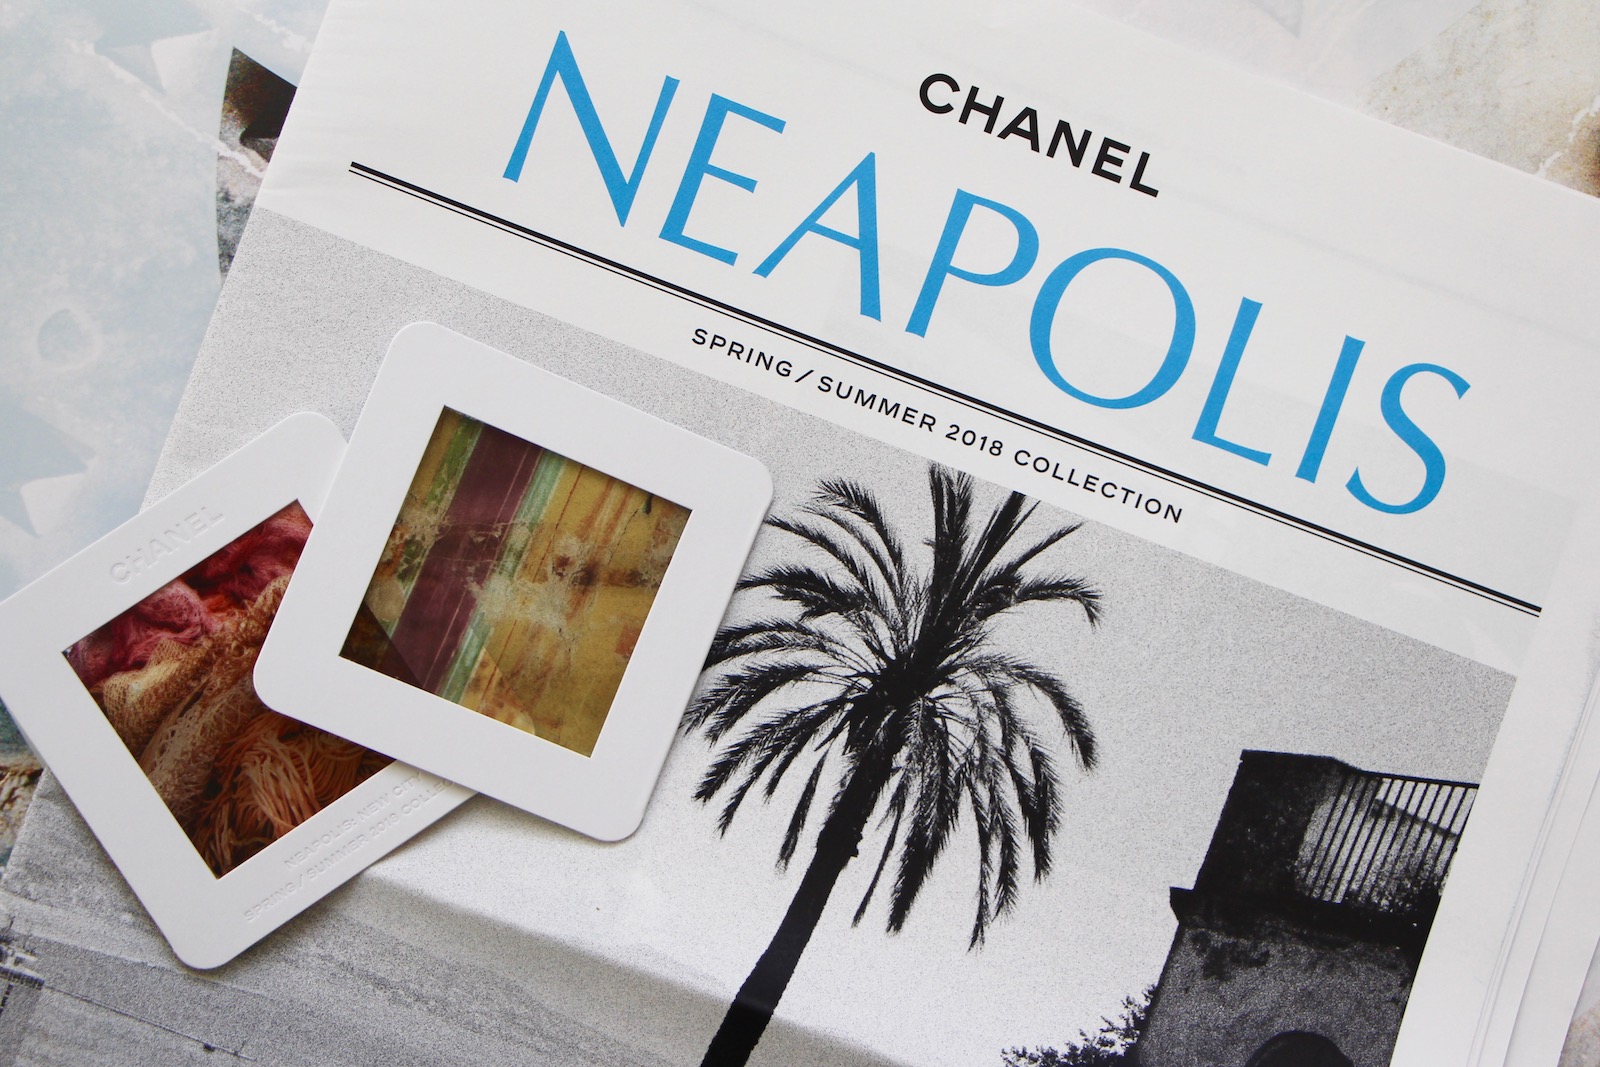 Chanel Spring & Summer 2018 Collection, Neapolis: New City: Review and  Swatches